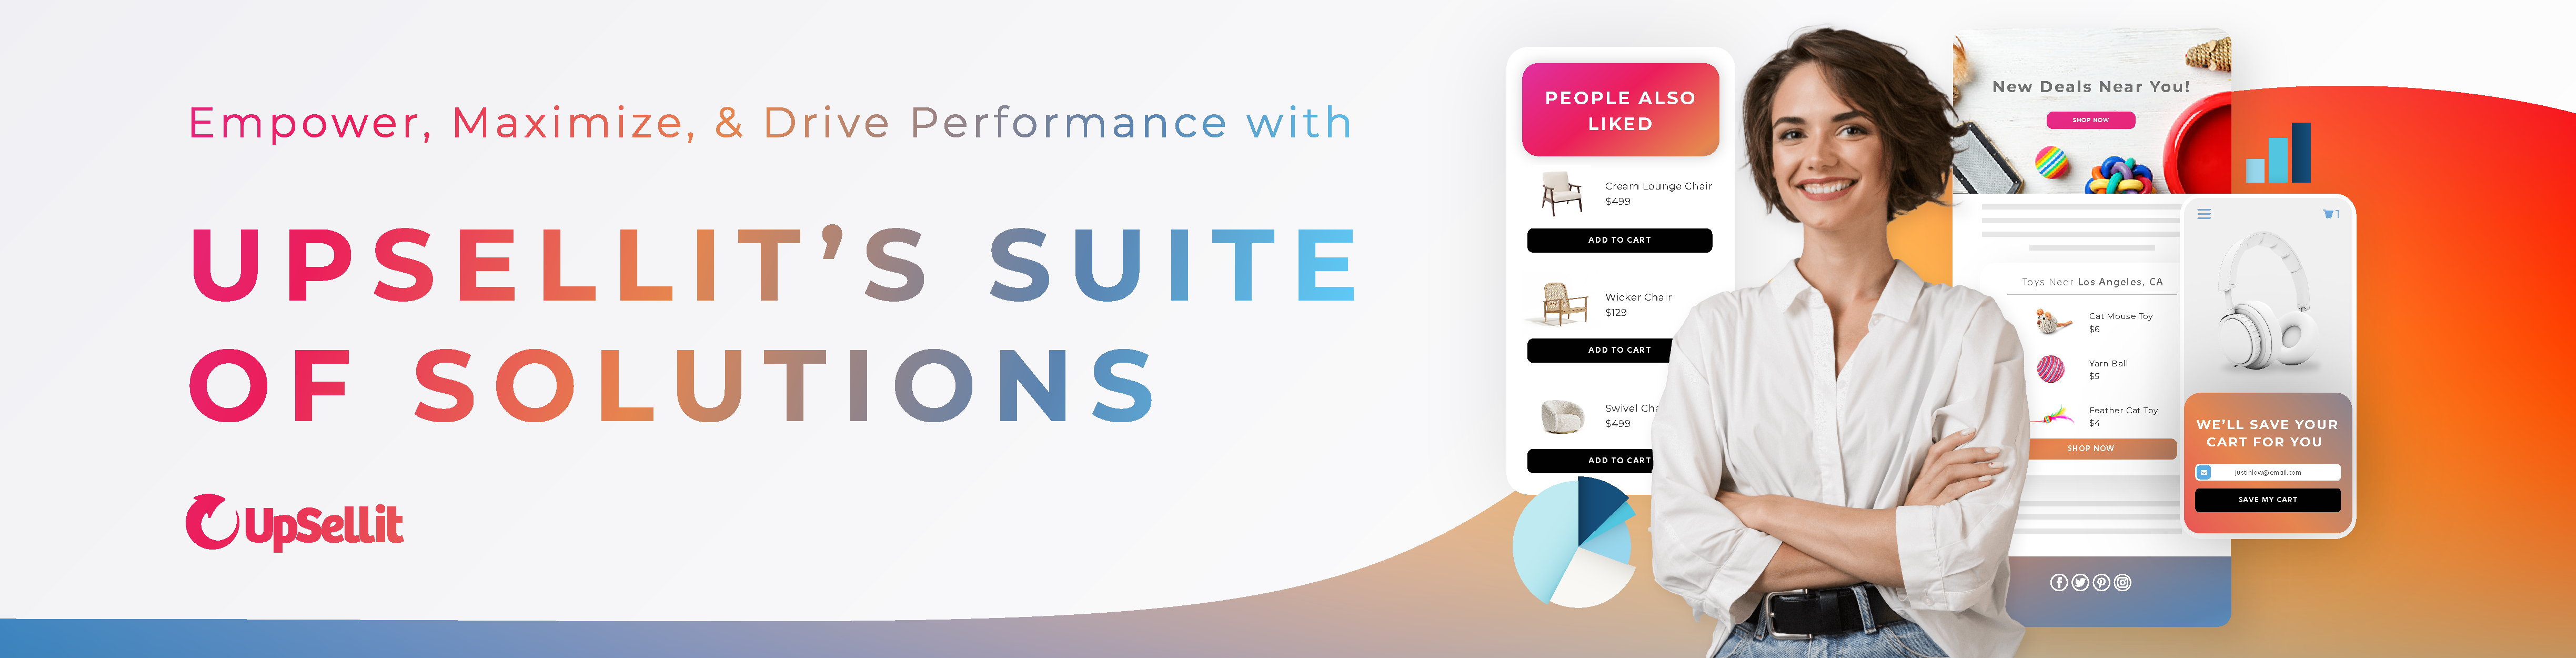 Empower, Maximize, & Drive Performance with UpSellit's Suite of Solutions